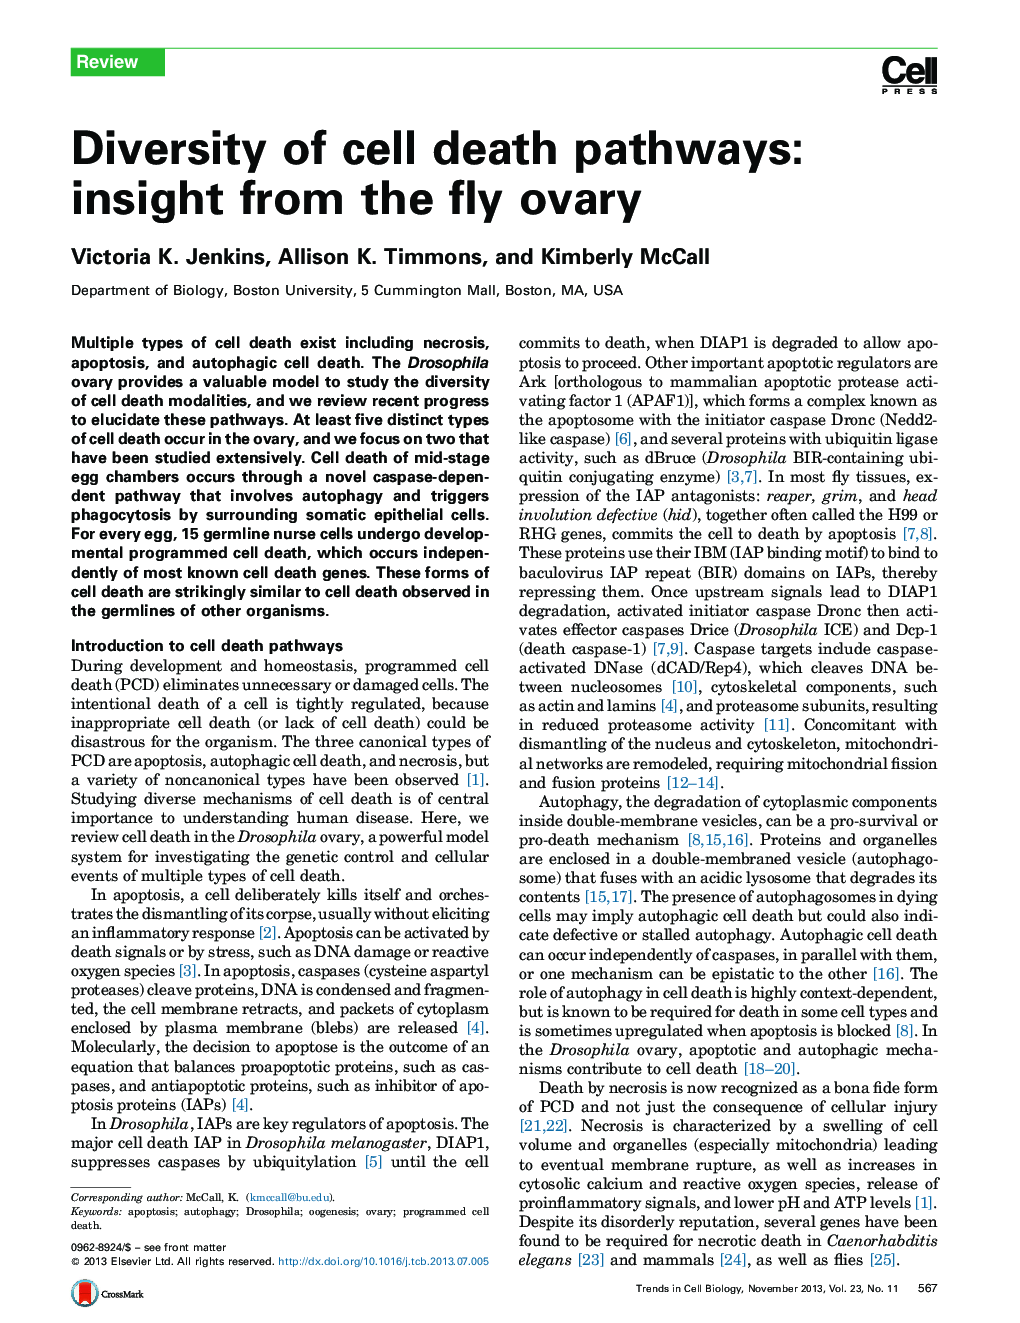 Diversity of cell death pathways: insight from the fly ovary